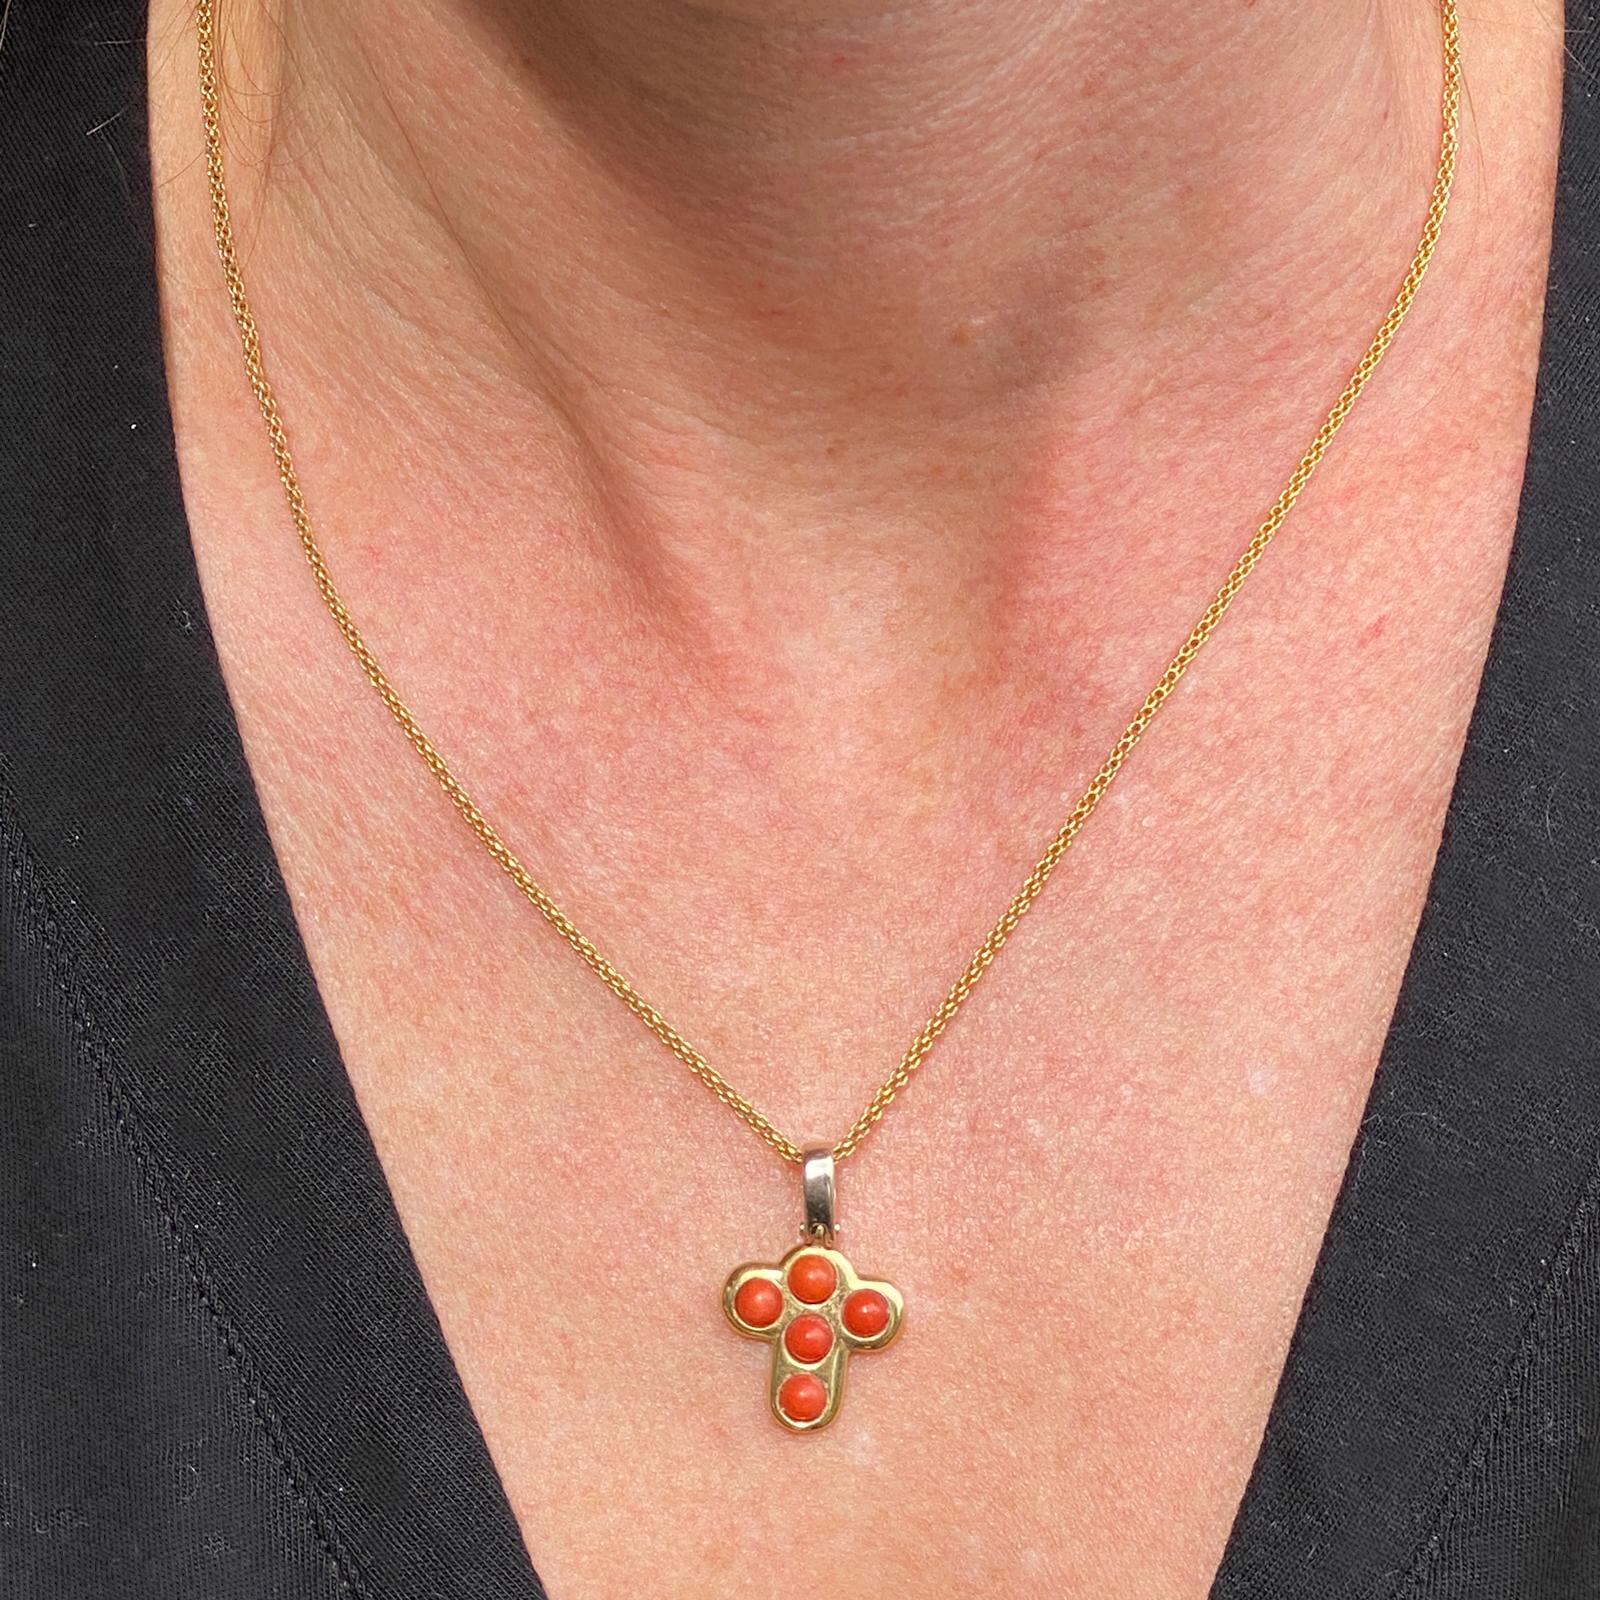 Fabulous vintage coral cross pendant and necklace crafted in 18 karat yellow gold ( the baile of the pendant is 18 karat white gold). The pendant featues 5 bezel set coral gemstones, and measures .60 x 1.00 inches. The 18k gold chain measures 16